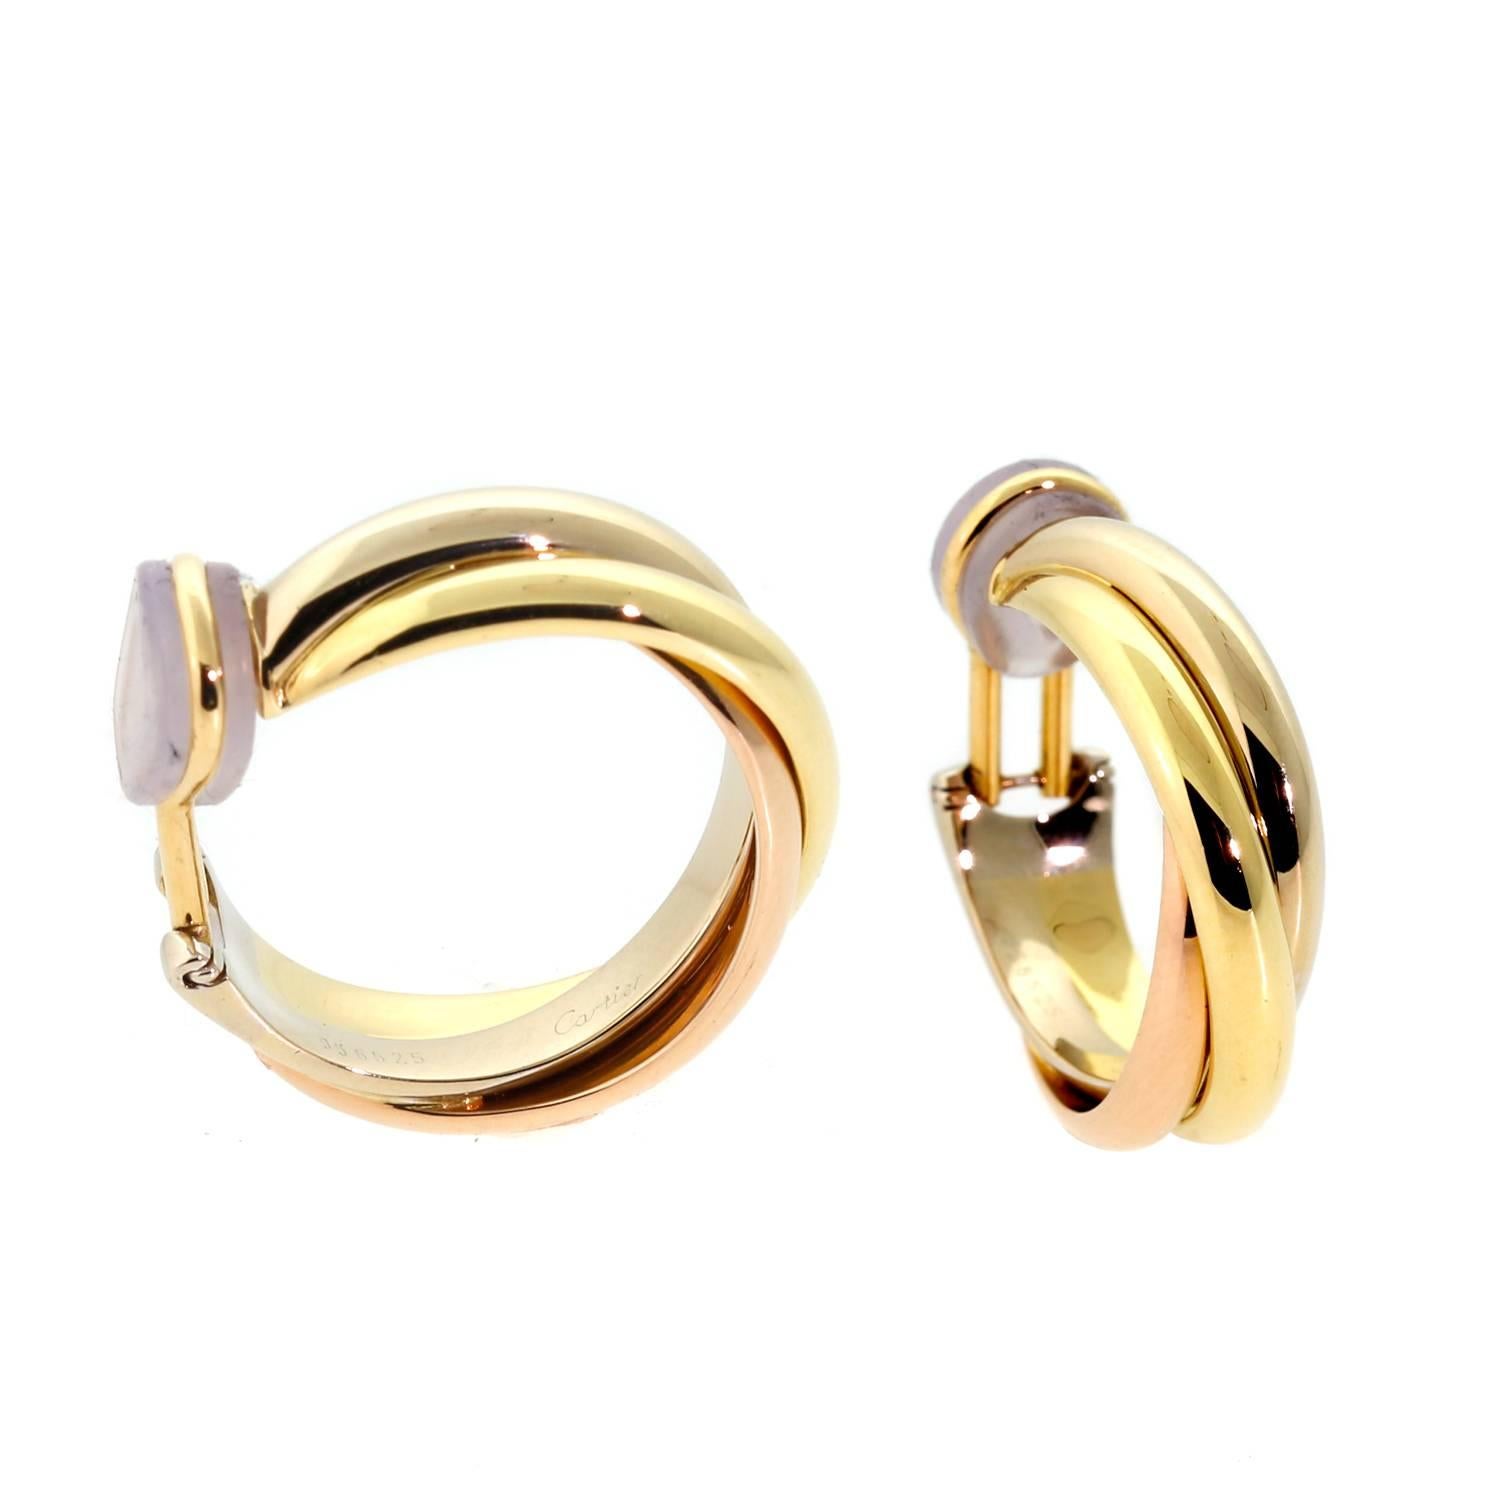 An pair of Cartier Trinity hoop earrings featuring 18k white yellow and rose gold to form this iconic look. Earring Width.27